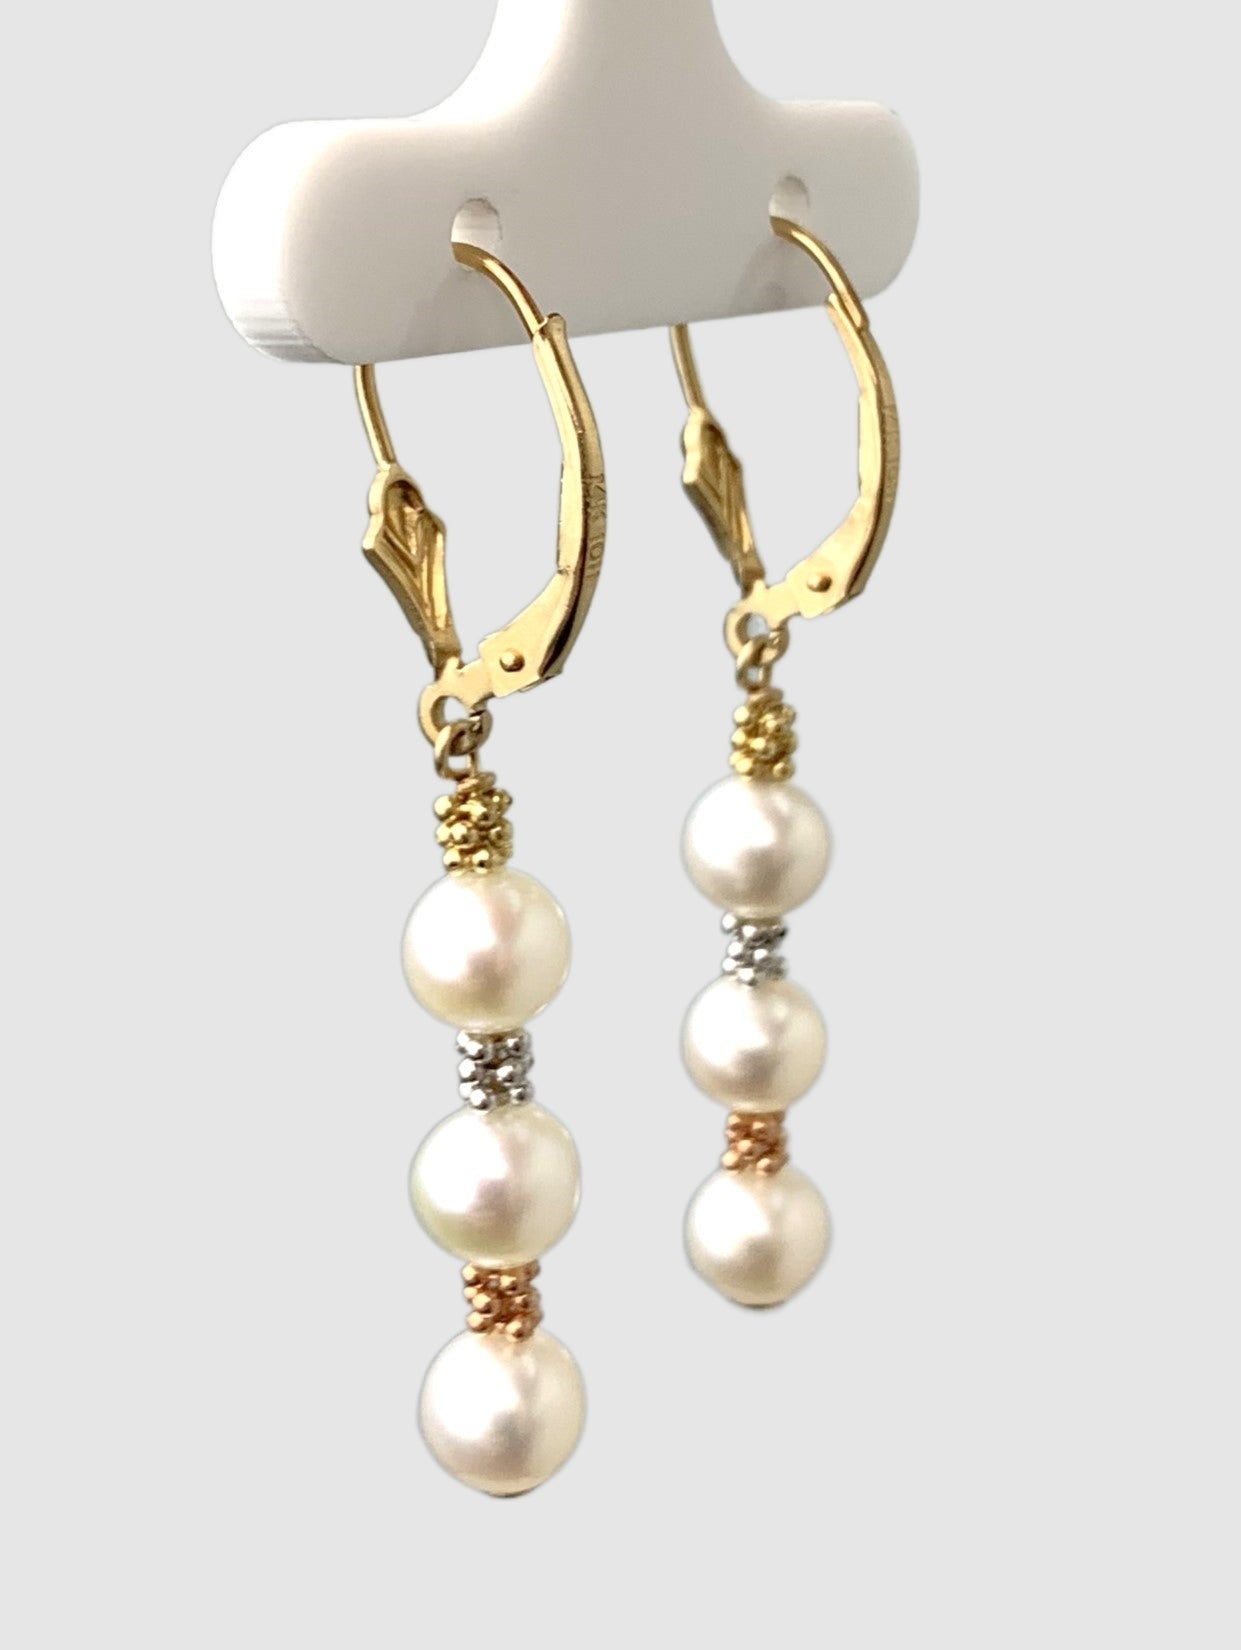 Clearance Sale! - Pearl and Rondelle Drop Earrings in 14KY - EAR-015-WIREPRL14Y-WH